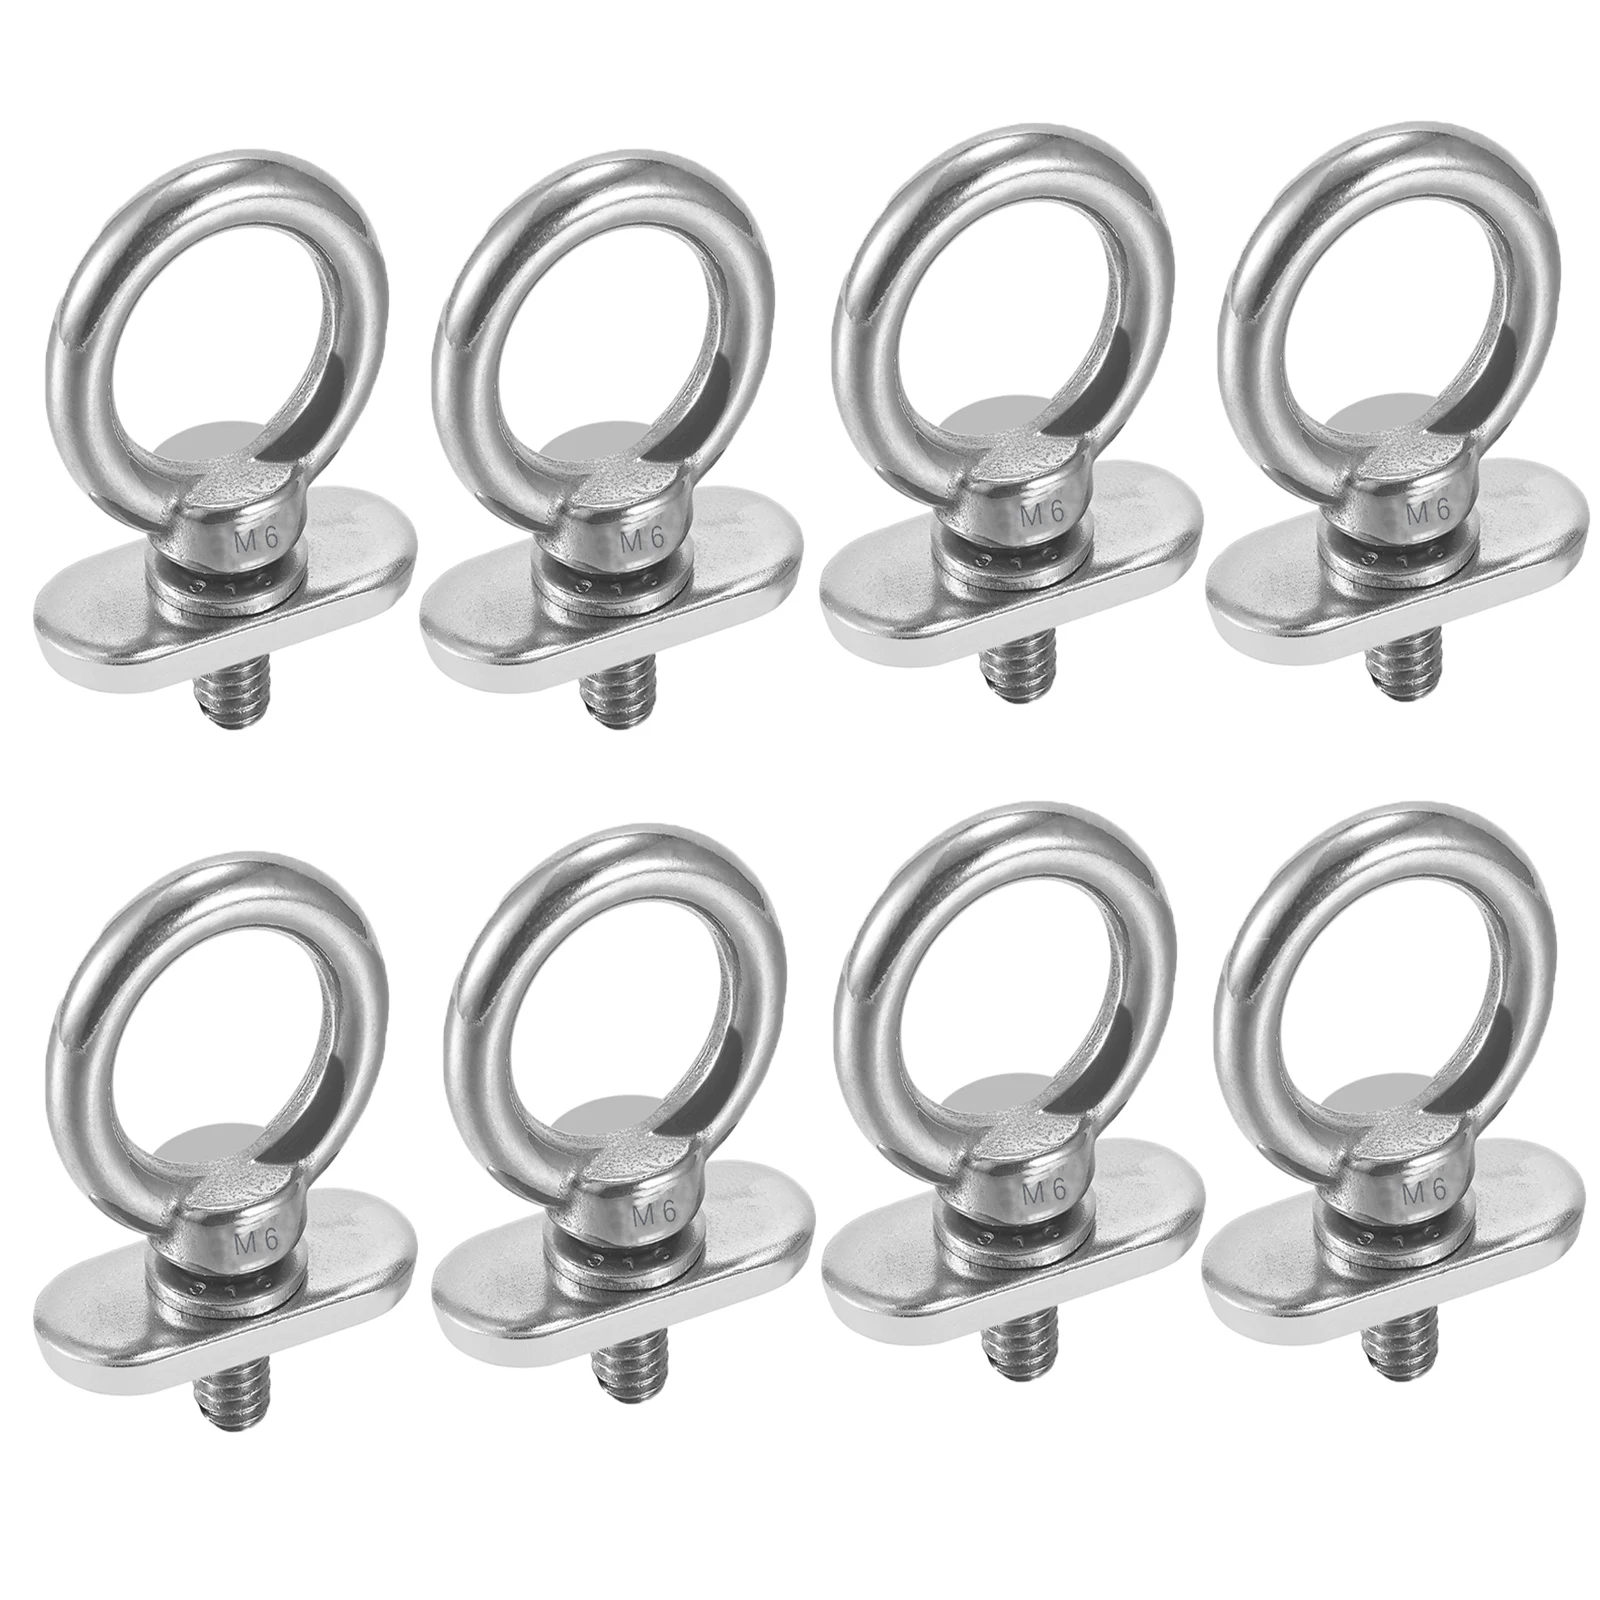 Track Mount Tie Down Eyelets, M6 Bolt (8 Packs), 316 Stainless Steel, Kayak Track Accessories 2pc ram mount track mounting base track gear attachment adapter kayak track mount for kayak boat canoe fishing rod accessories